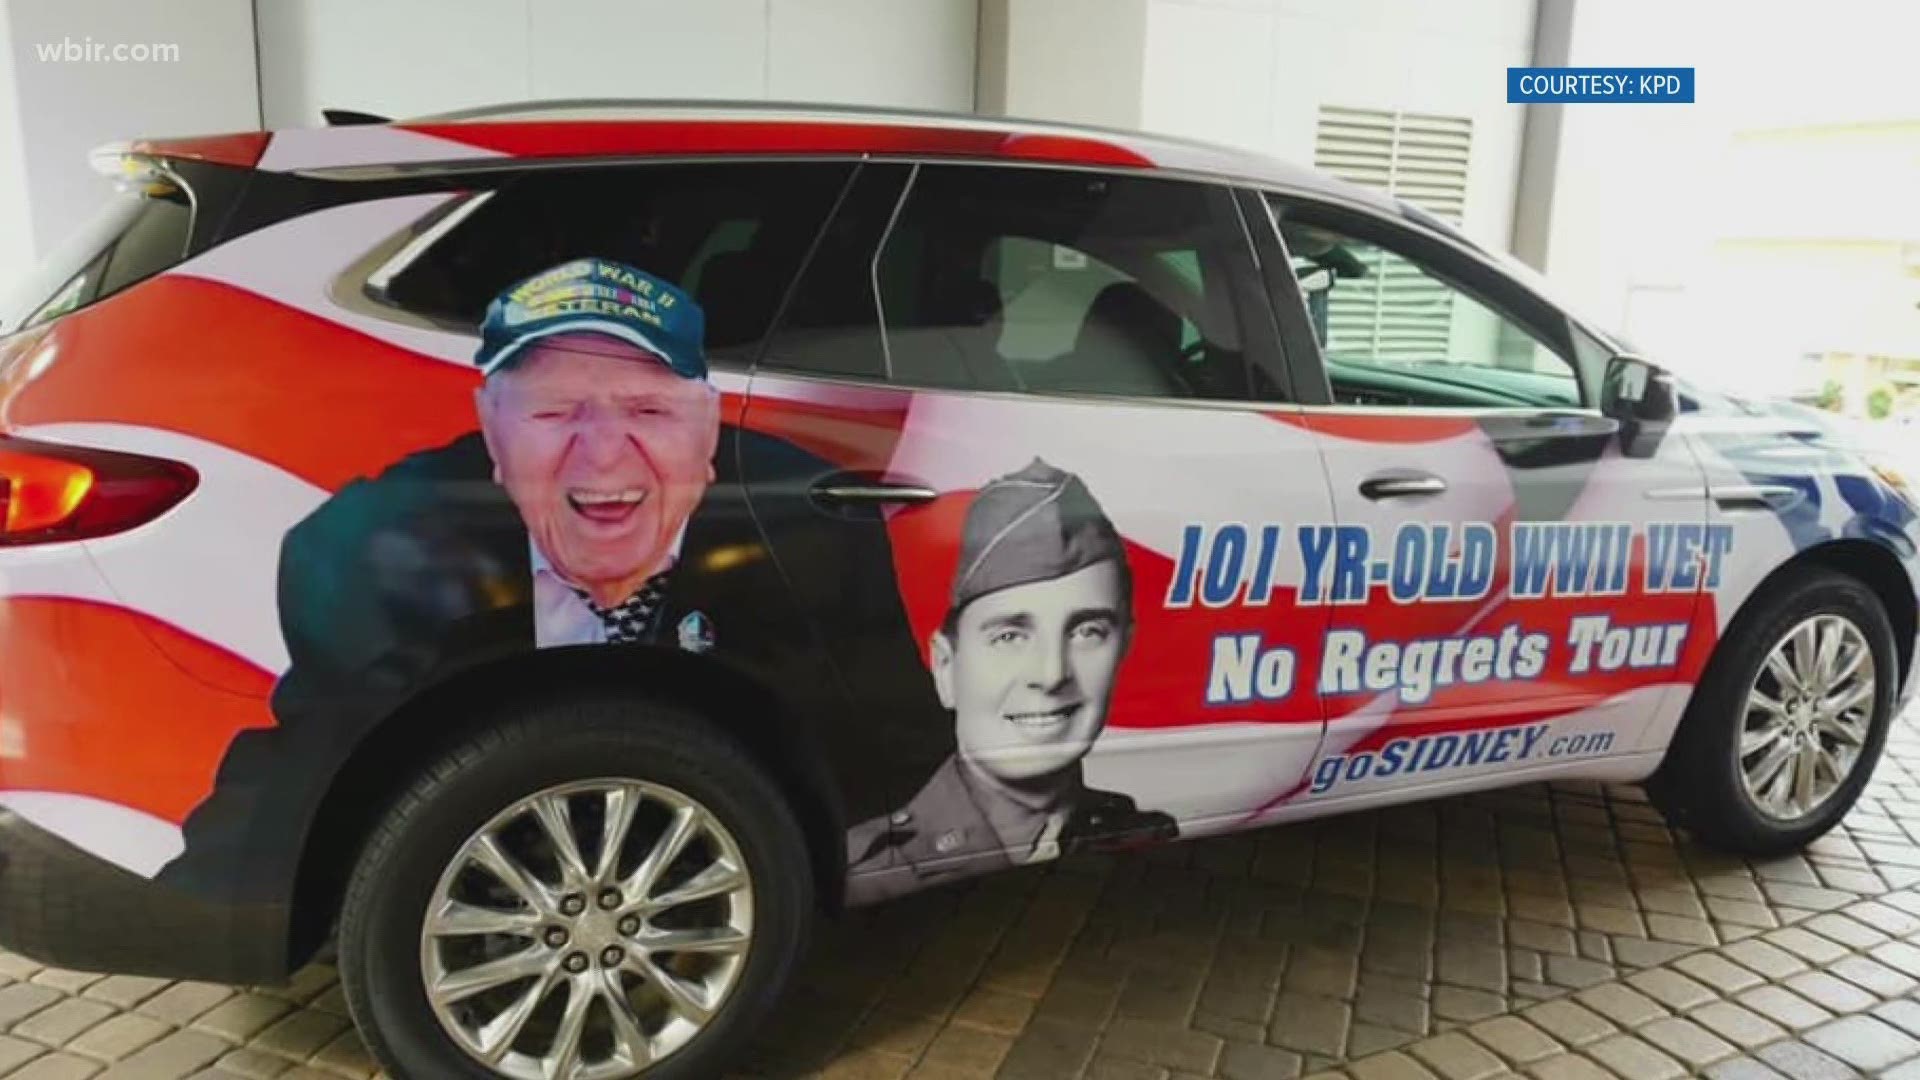 He was traveling north to honor the 75th anniversary of the end of World War II.